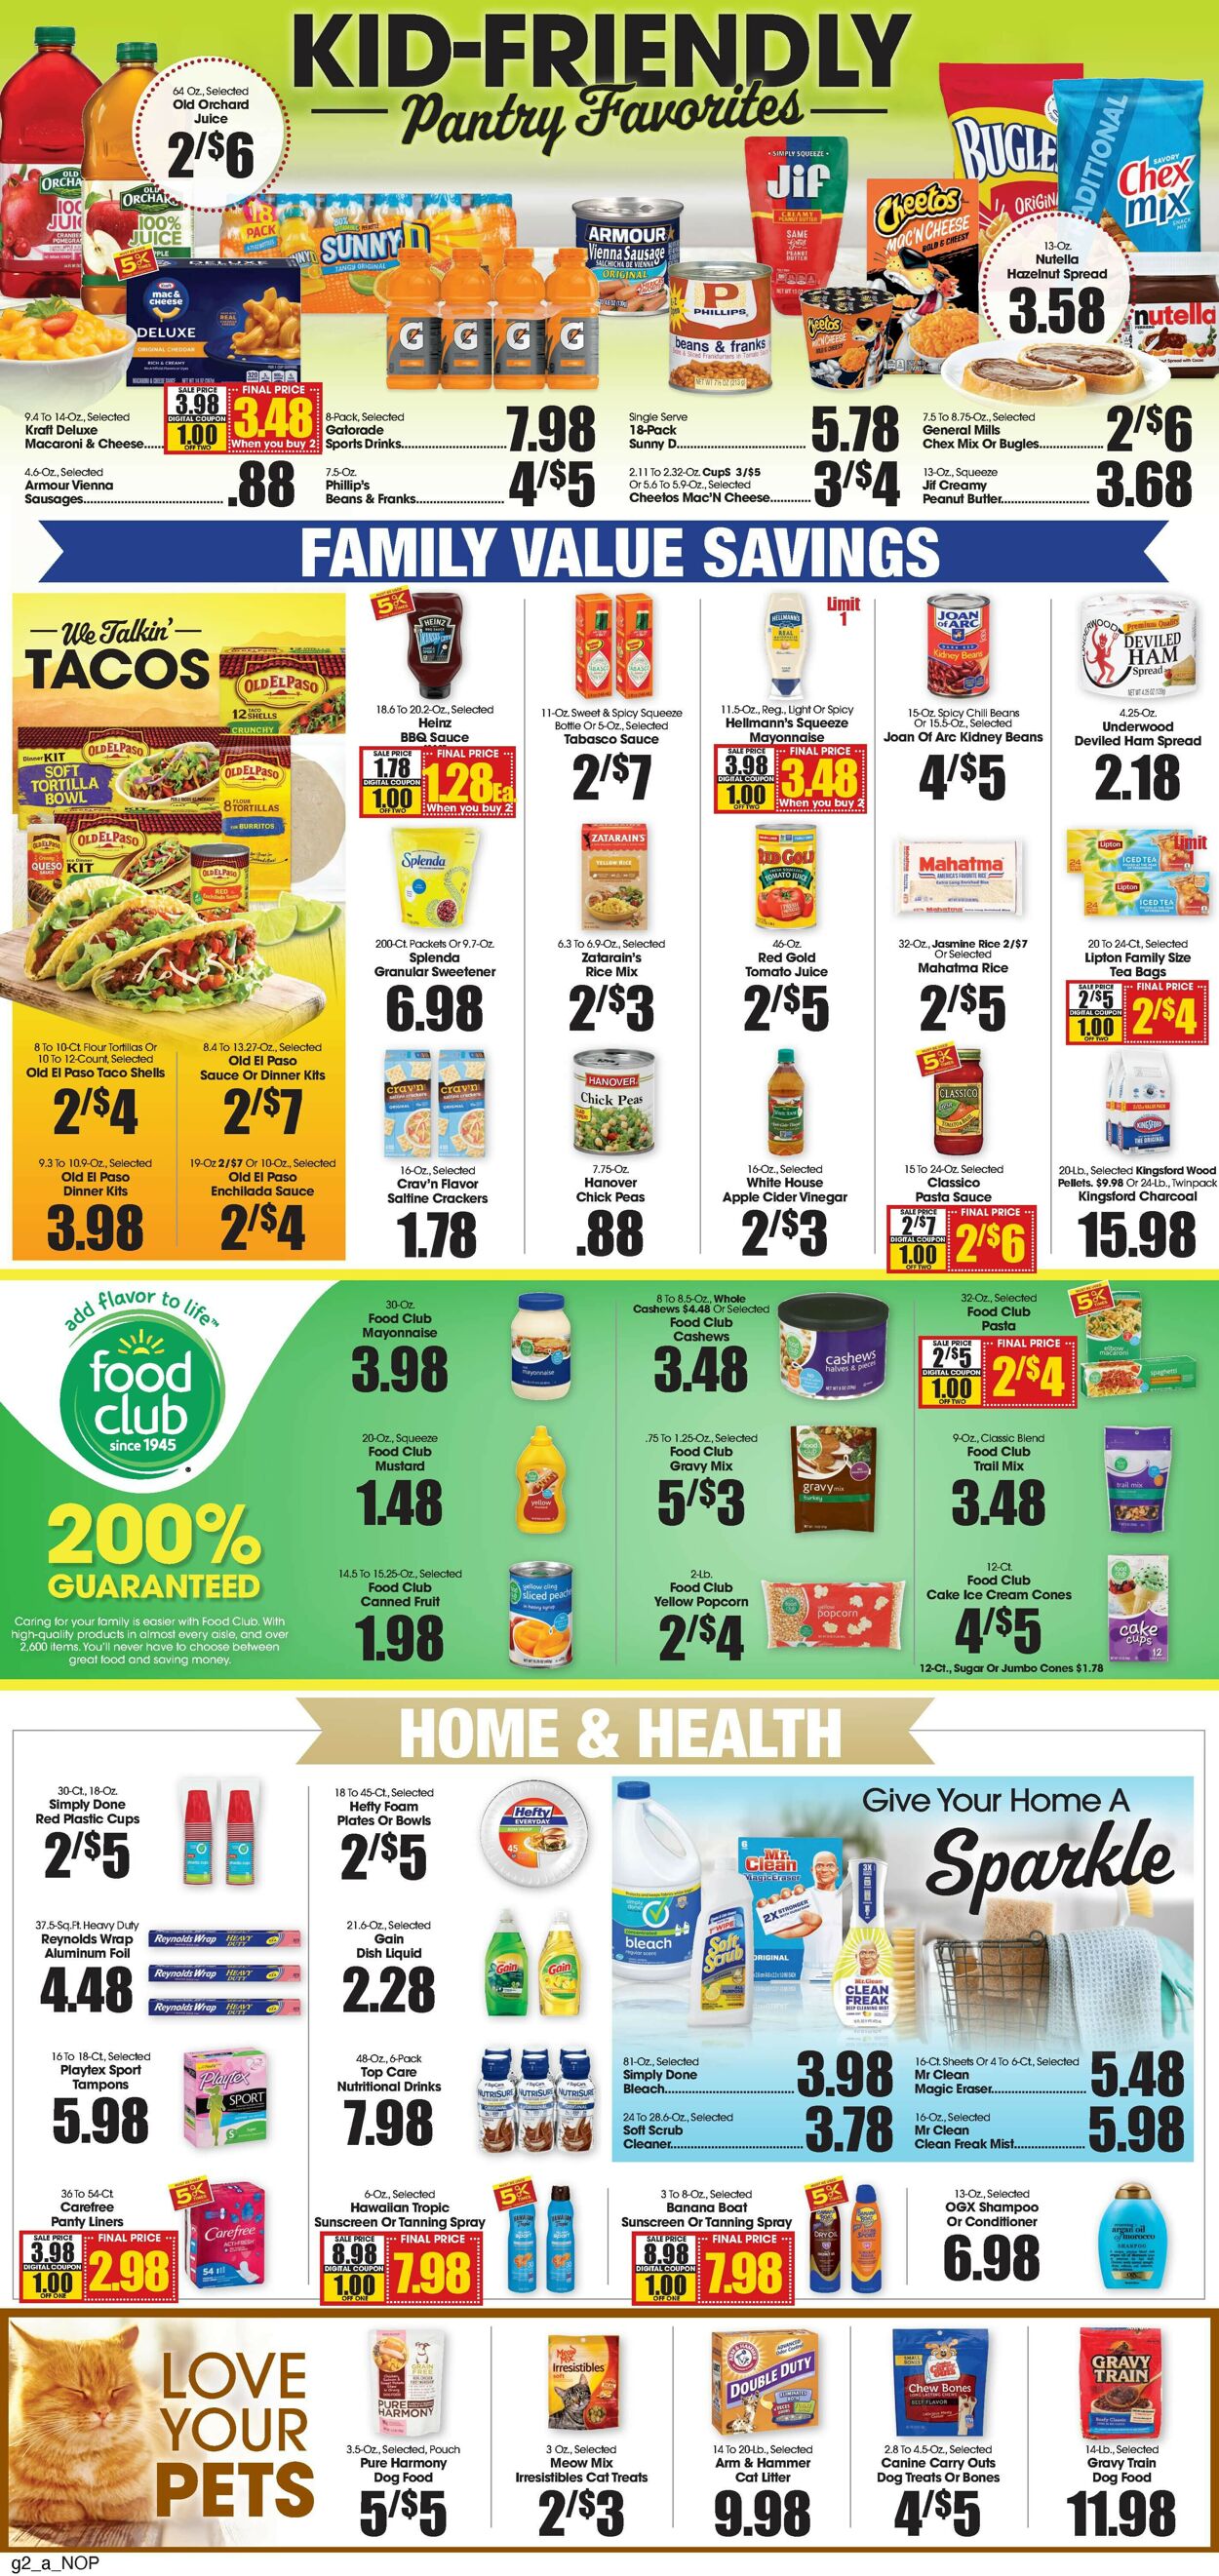 Catalogue Grant's Supermarket from 04/15/2023